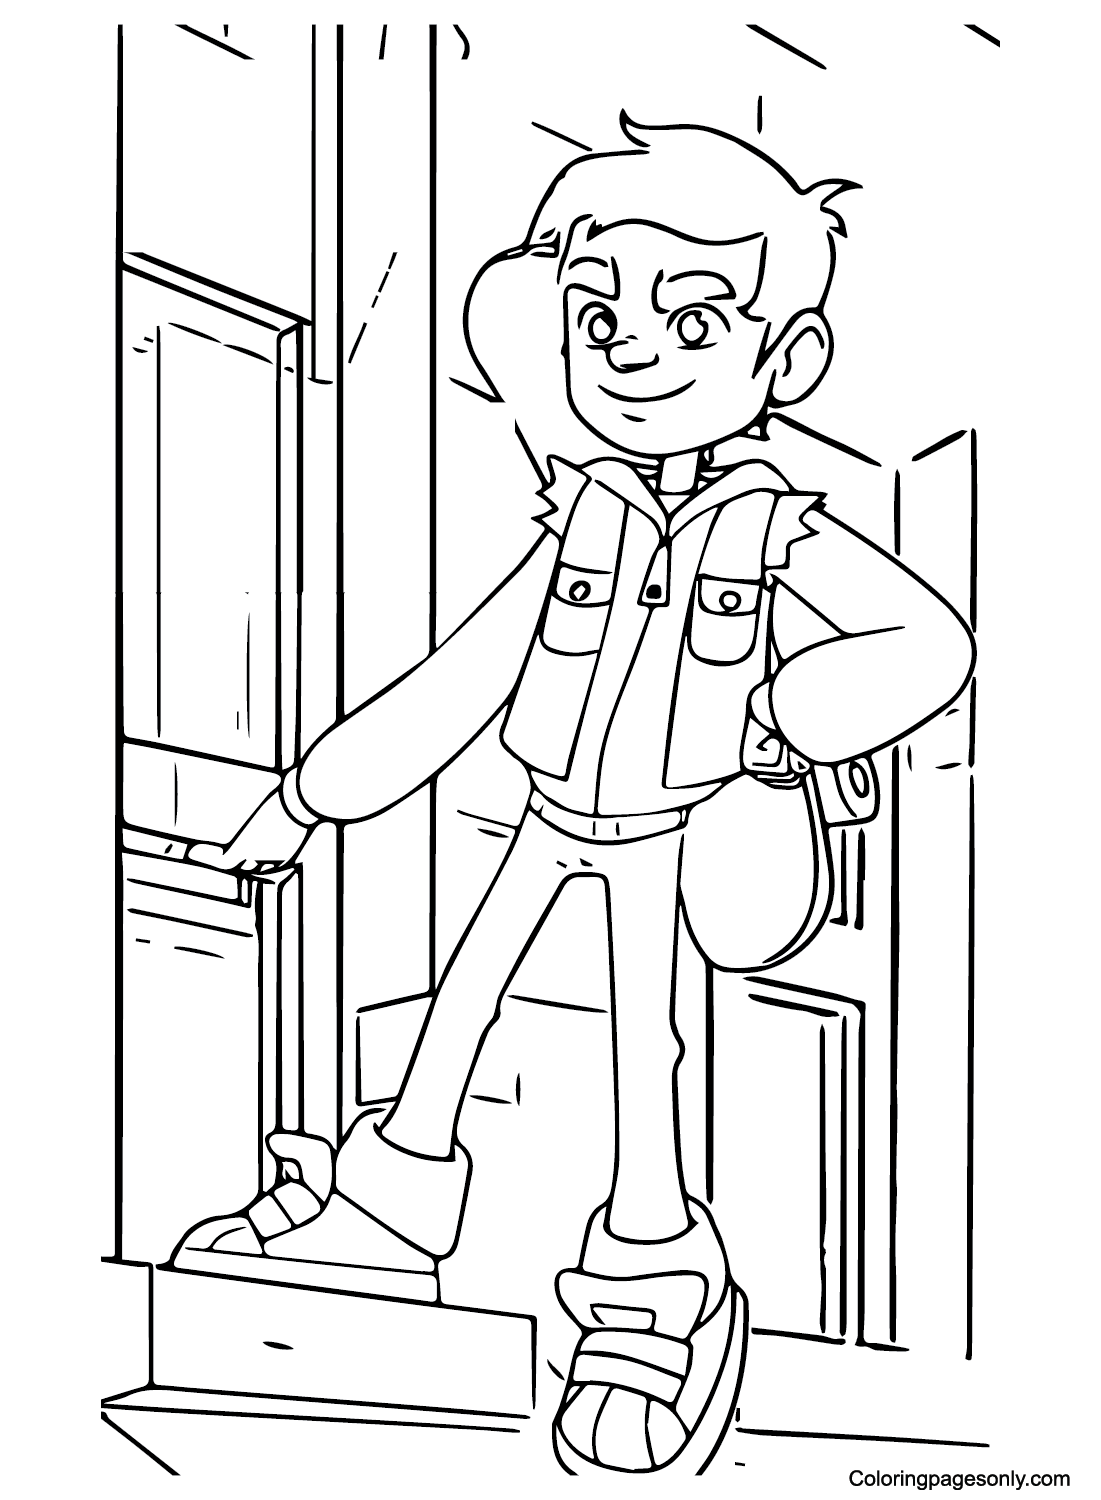 Jaro from Subway Surfers - Coloring Pages for kids